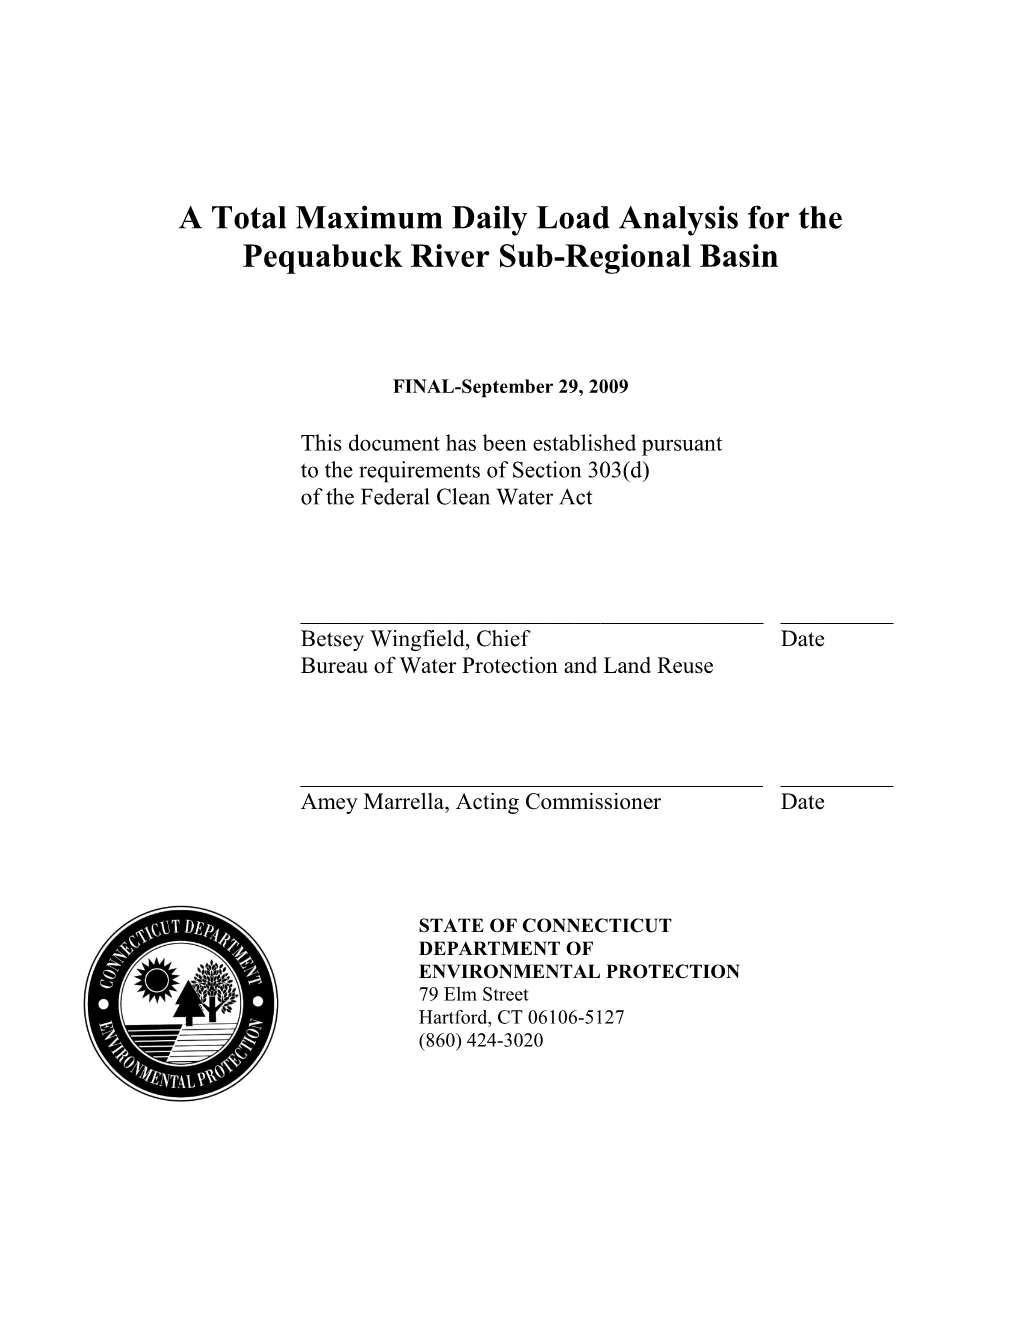 A Total Maximum Daily Load Analysis for the Quinnipiac River Regional